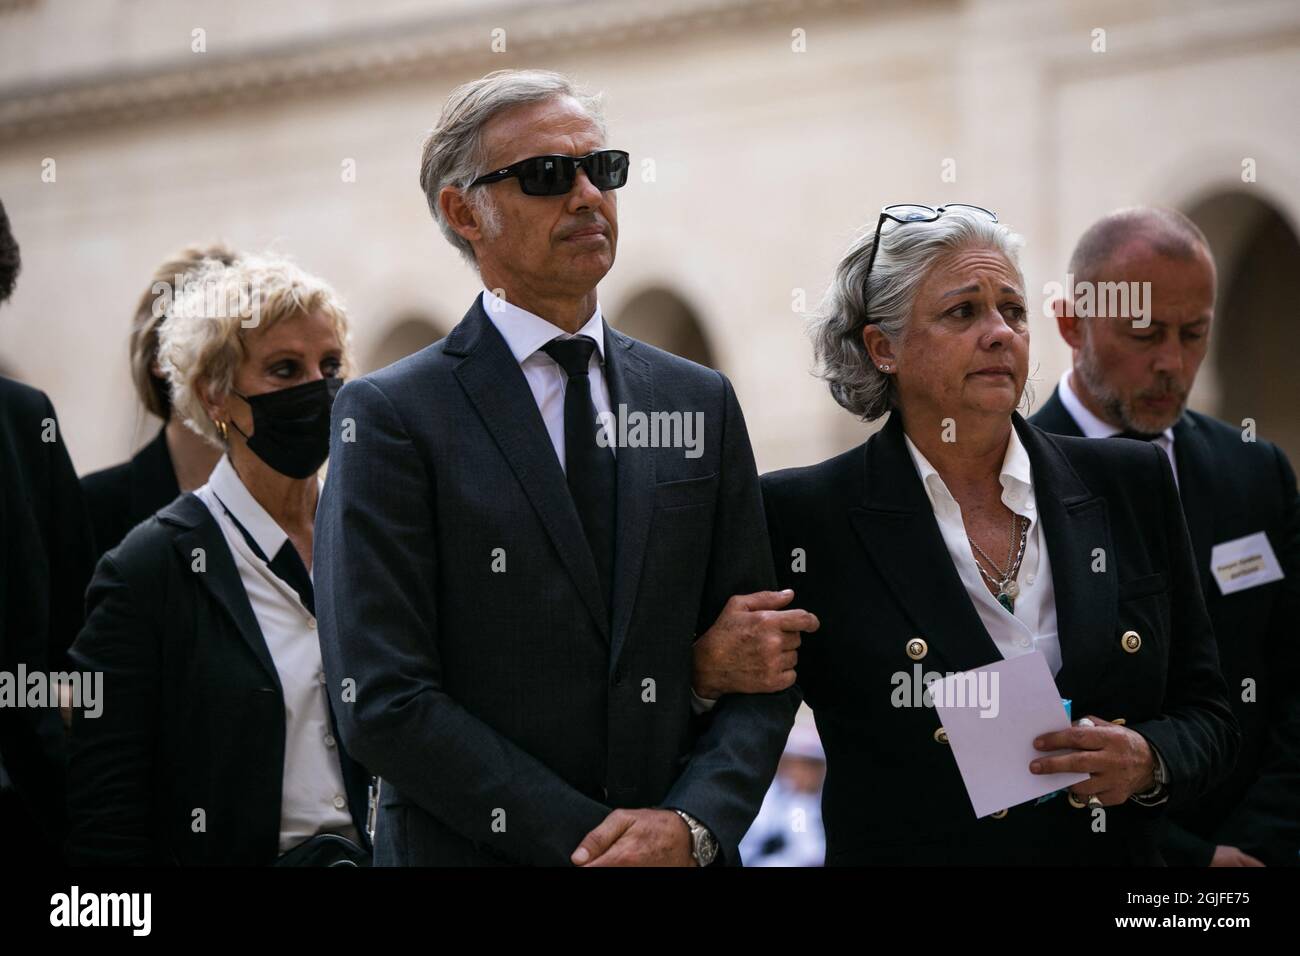 Paul Belmondo, his sister Florence Belmondo and family during Jean-Paul  Belmondo's national tribute held at the Hotel des Invalides in Paris,  France on September 9, 2021. French famous actor Jean-Paul Belmondo is